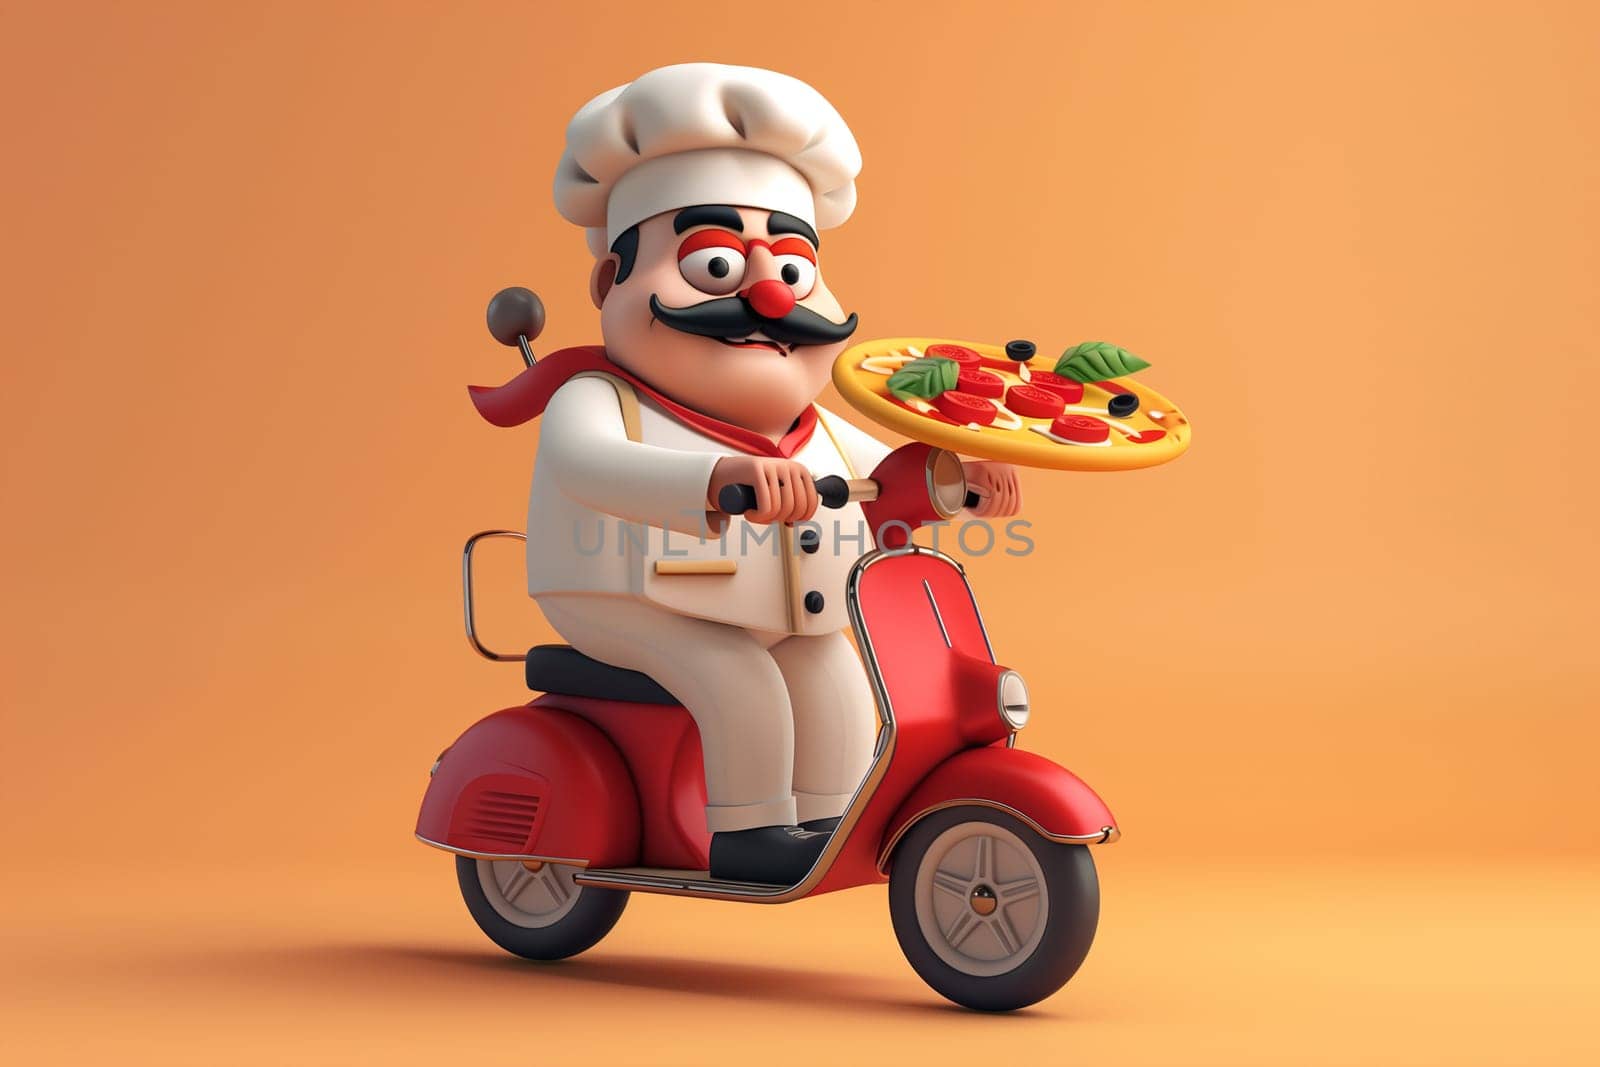 A fun cartoon character rides a moped while holding a delicious pizza in hand.